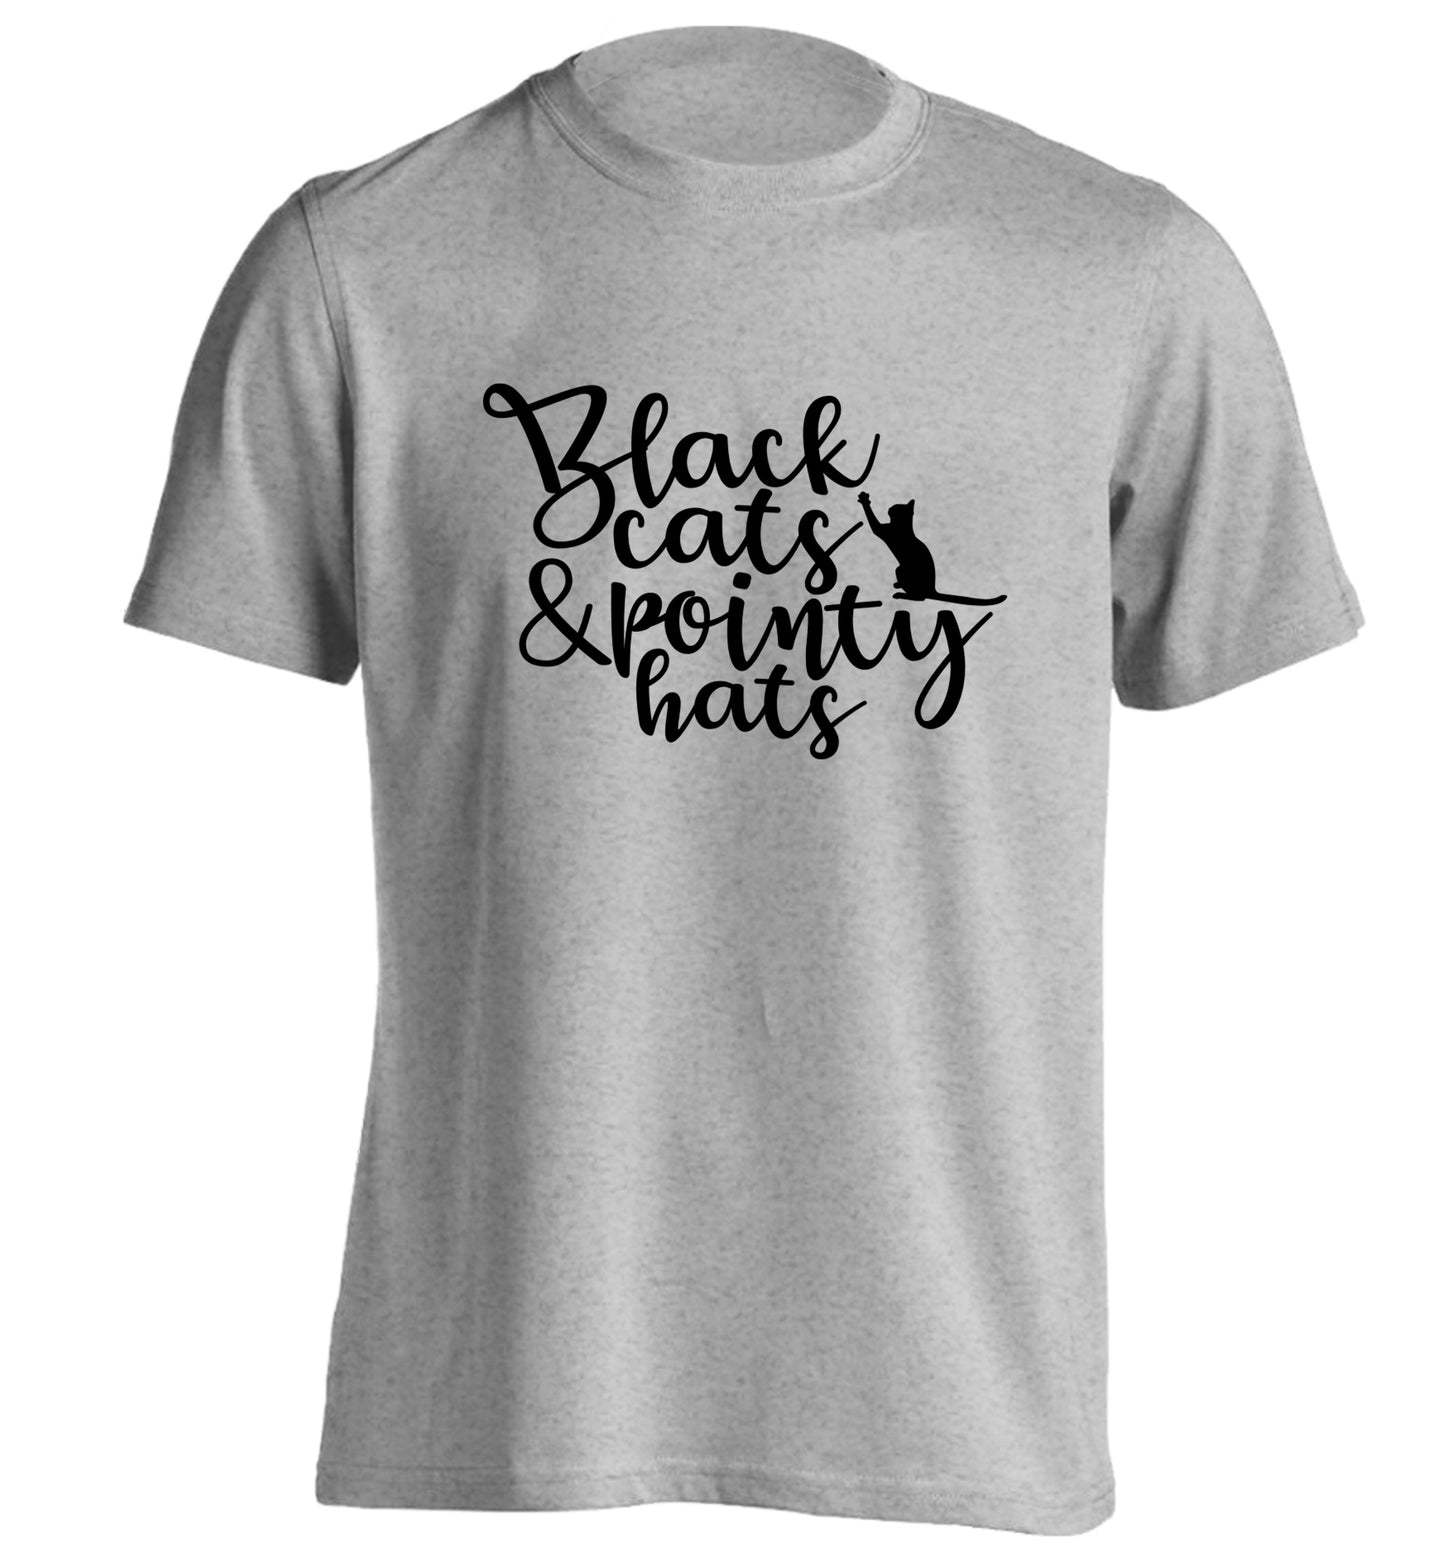 Black cats and pointy hats adults unisex grey Tshirt 2XL